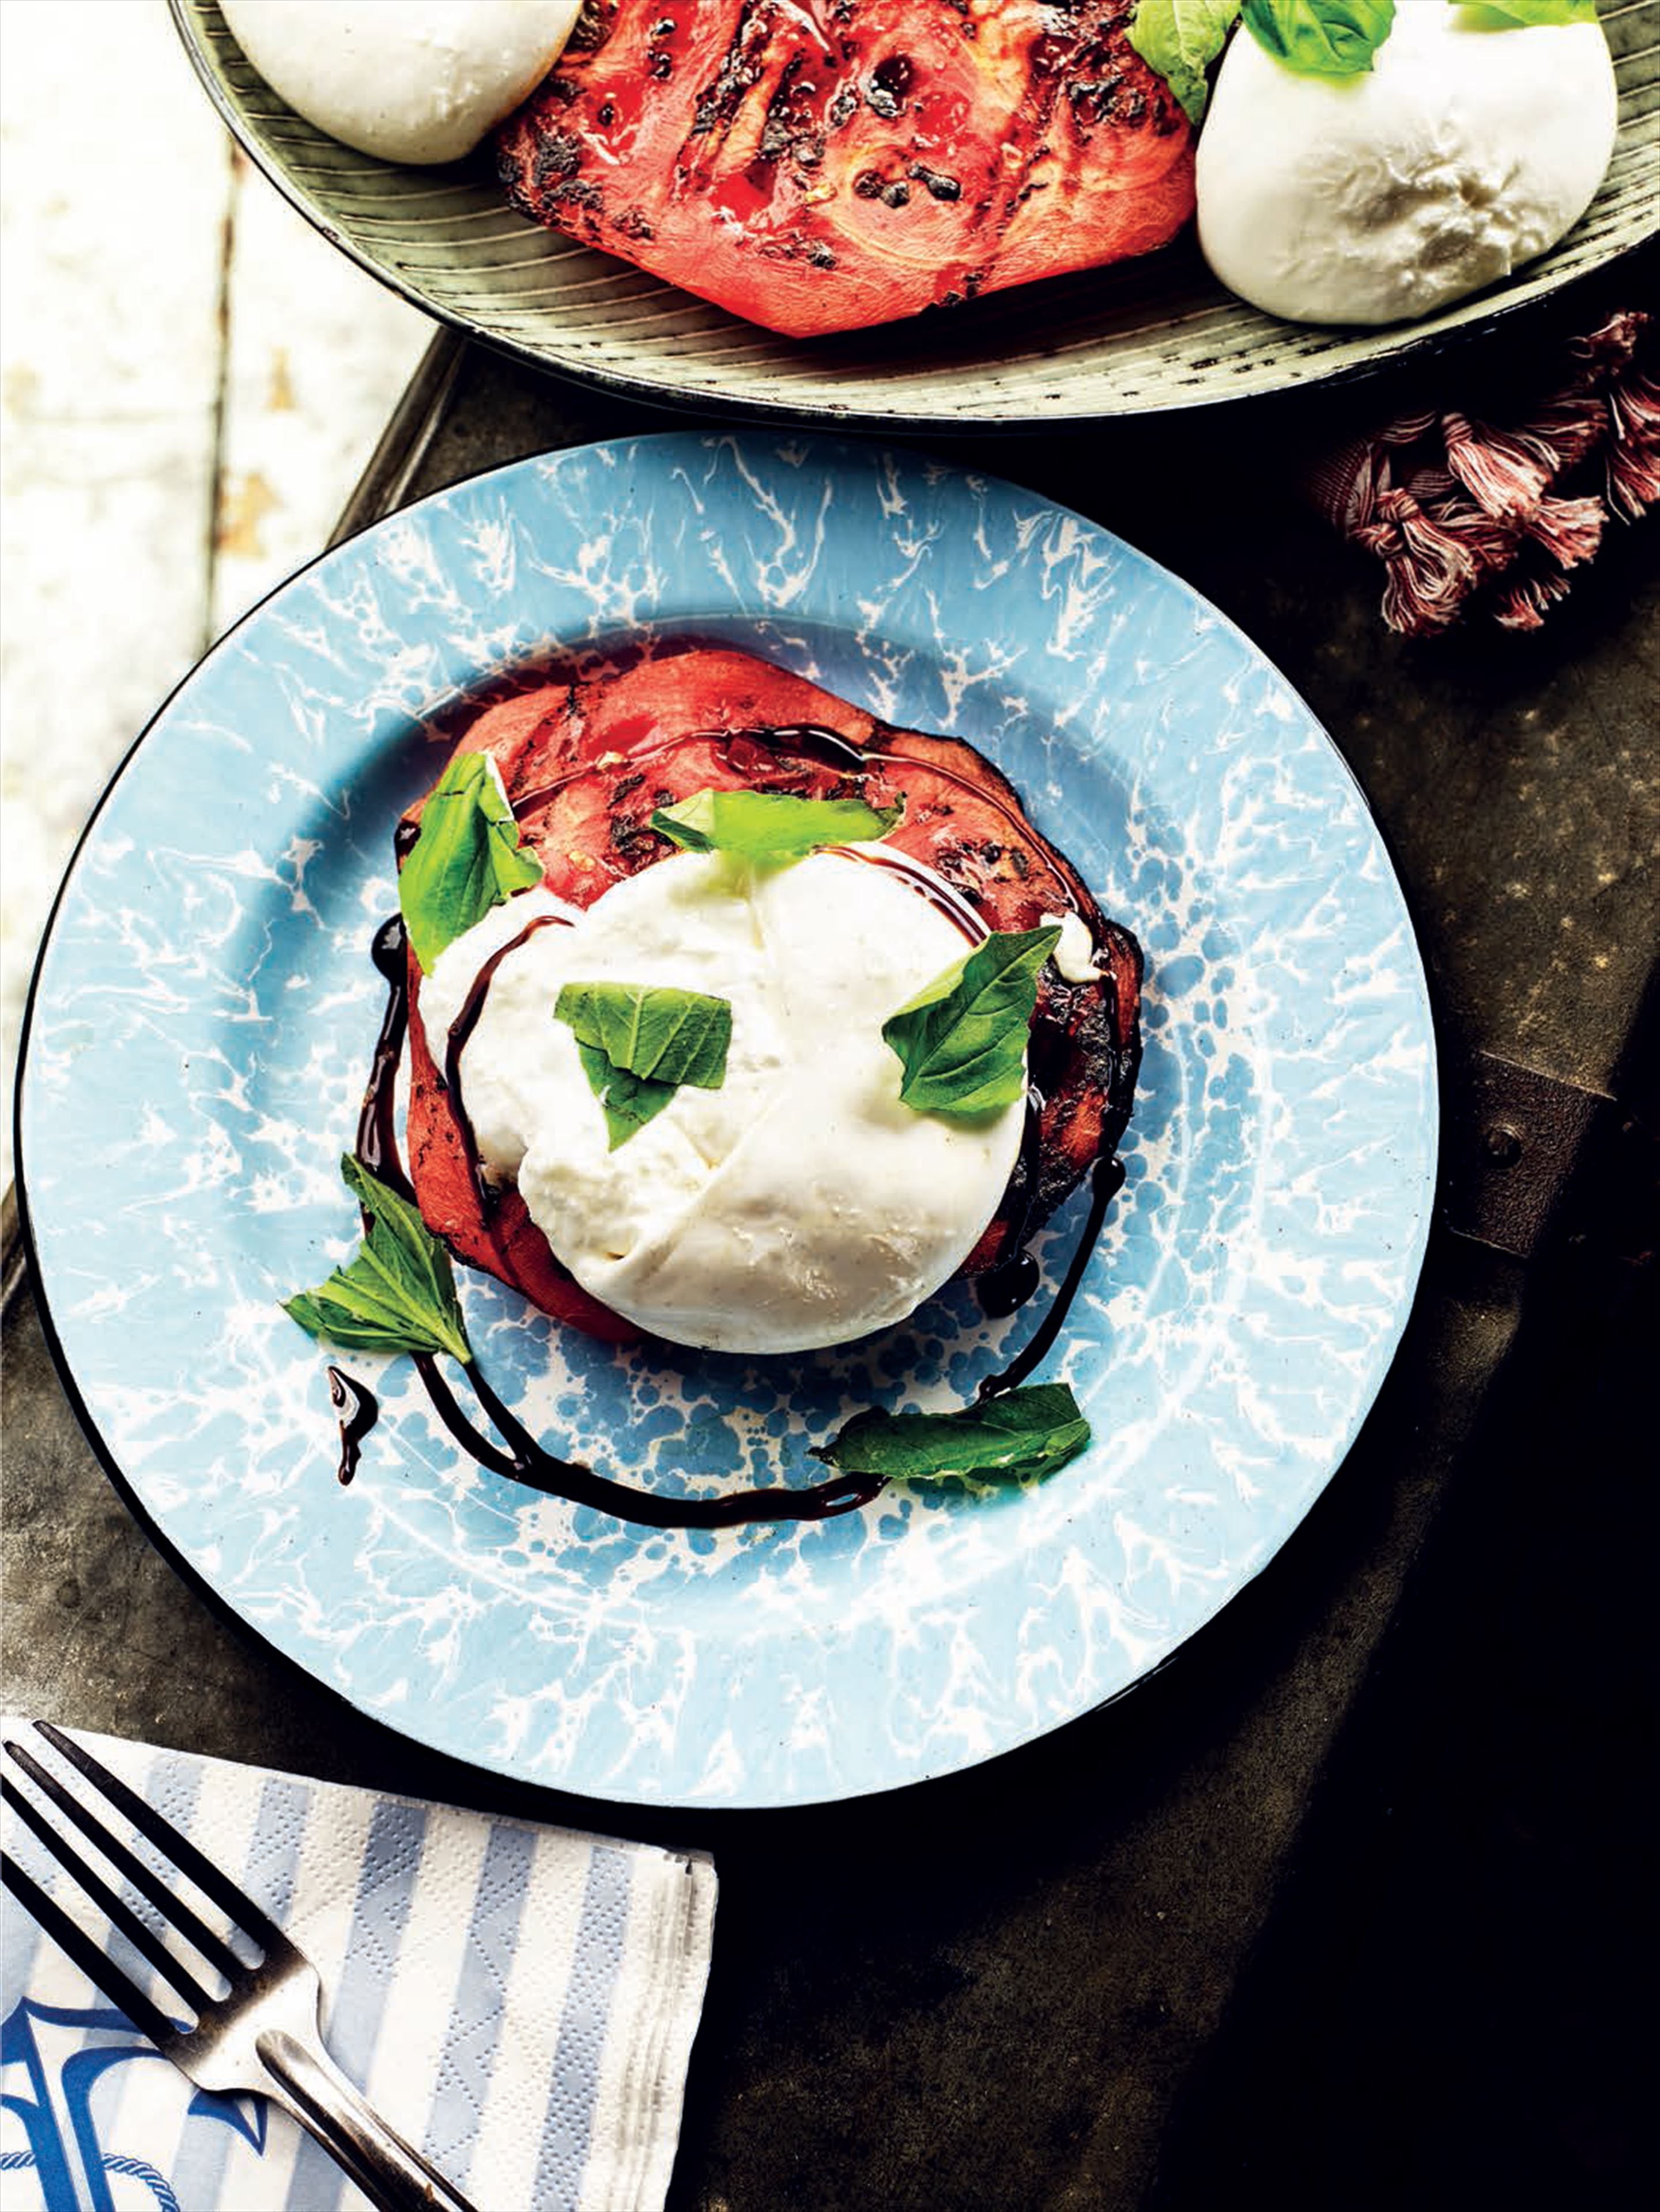 Smoky grilled watermelon with burrata, balsamic and basil